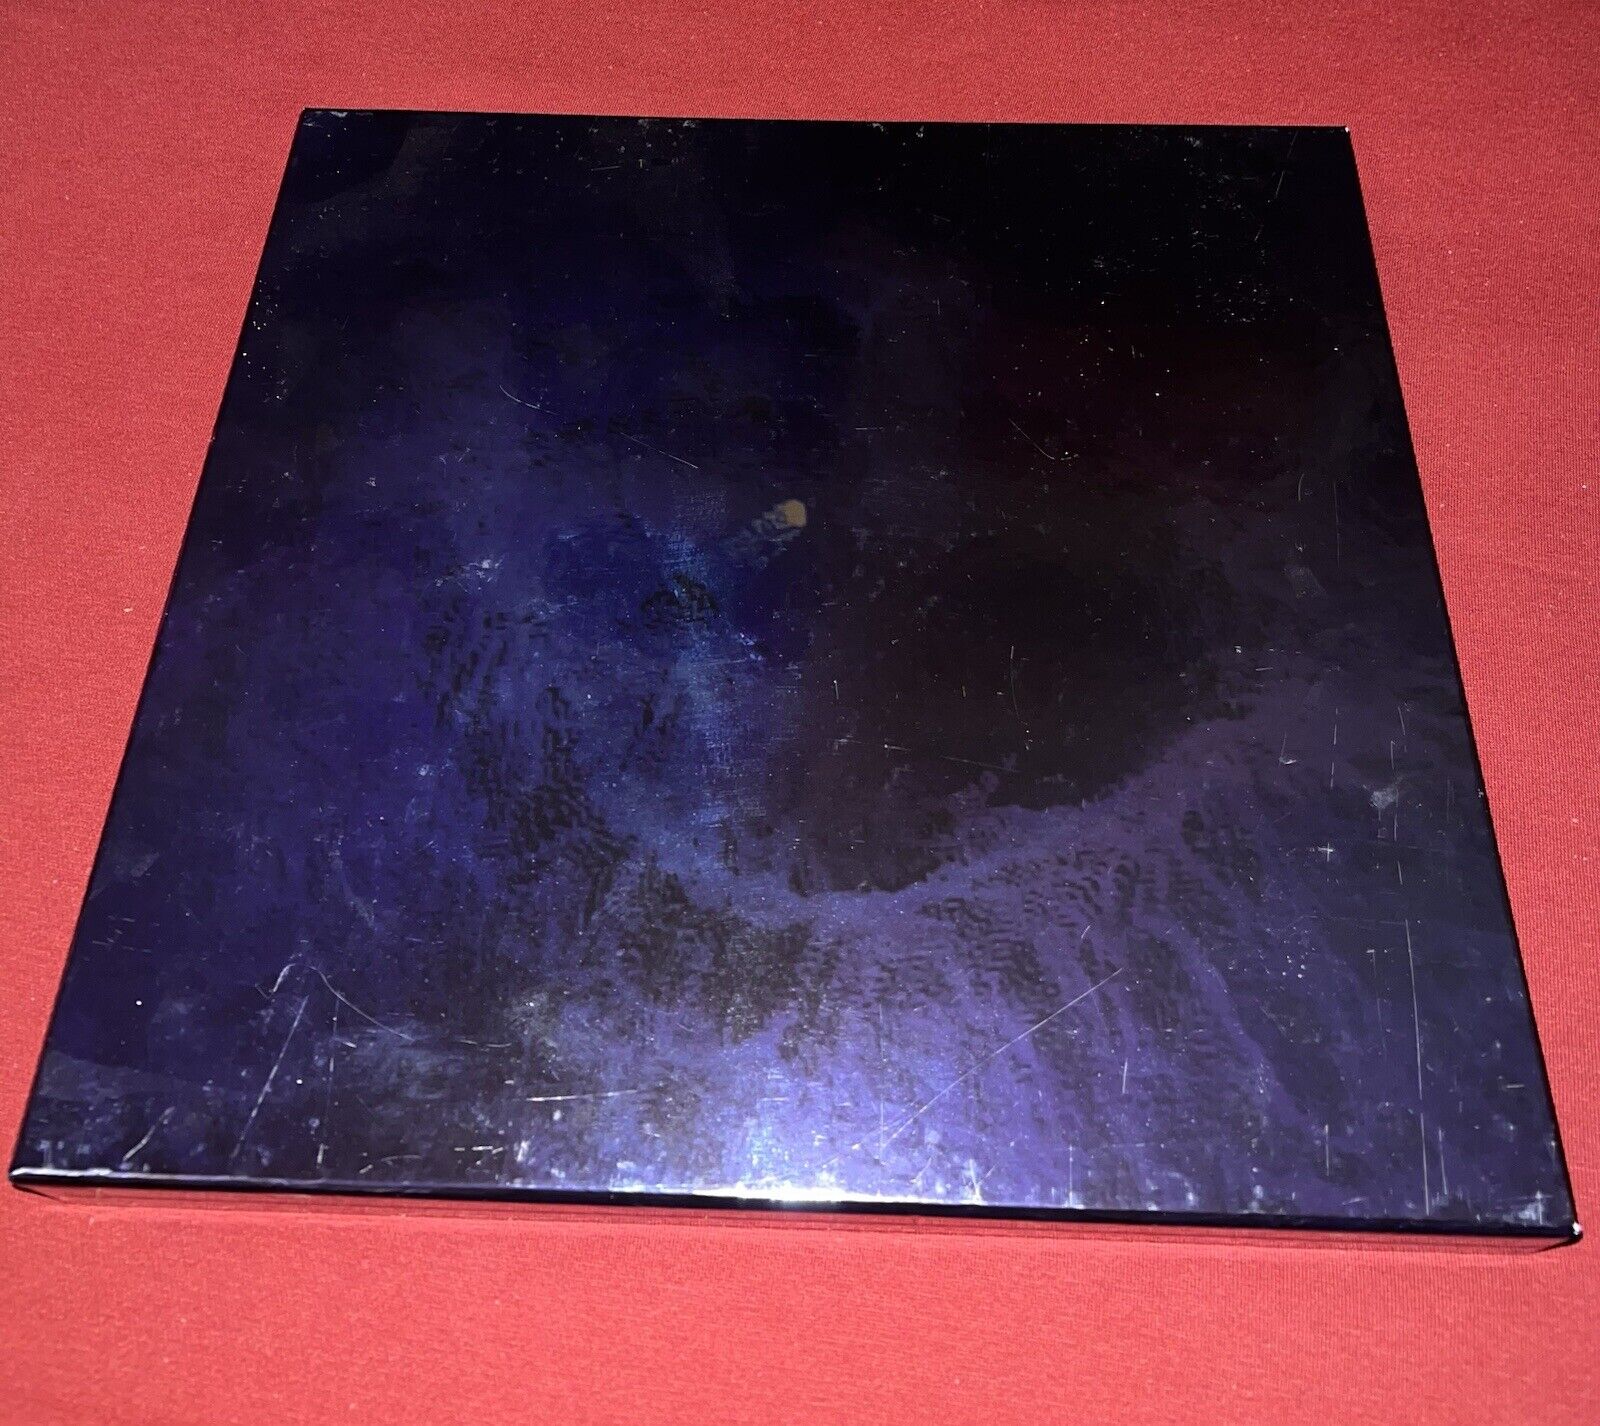 Tool Fear Inoculum (Deluxe Limited Edition) 5LP Set Records & LPs Used